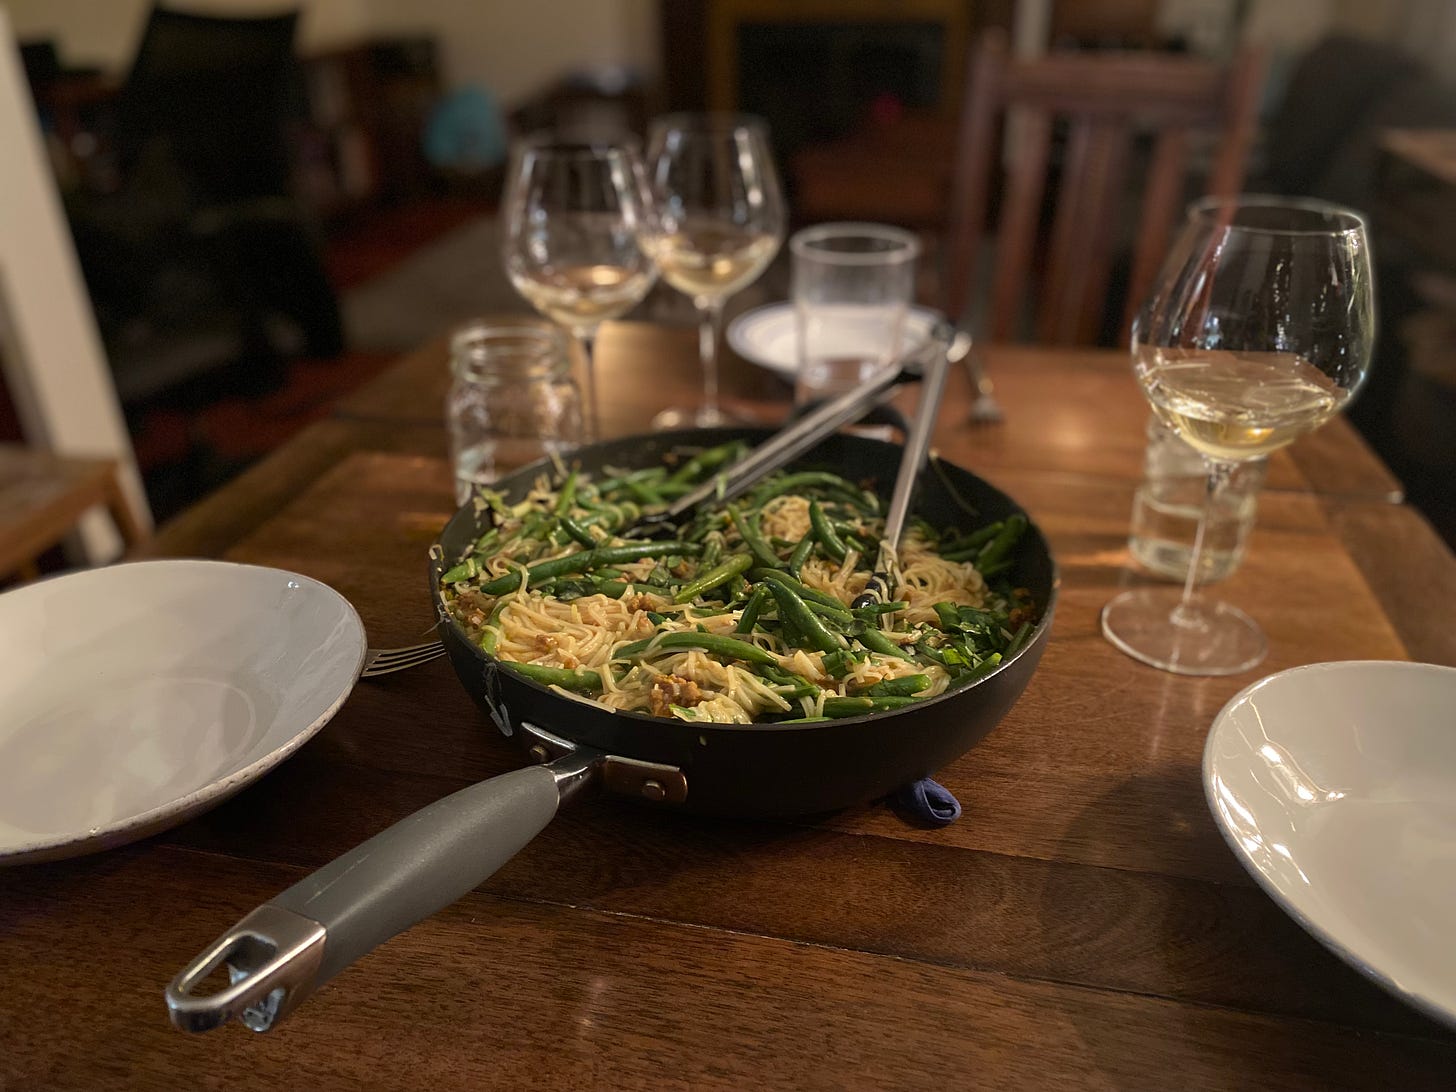 A table set with white plates and wine glasses, partially full with white wine. A sauté pan of the noodle dish described above sits on a potholder in the centre, a pair of tongs sticking out of it.